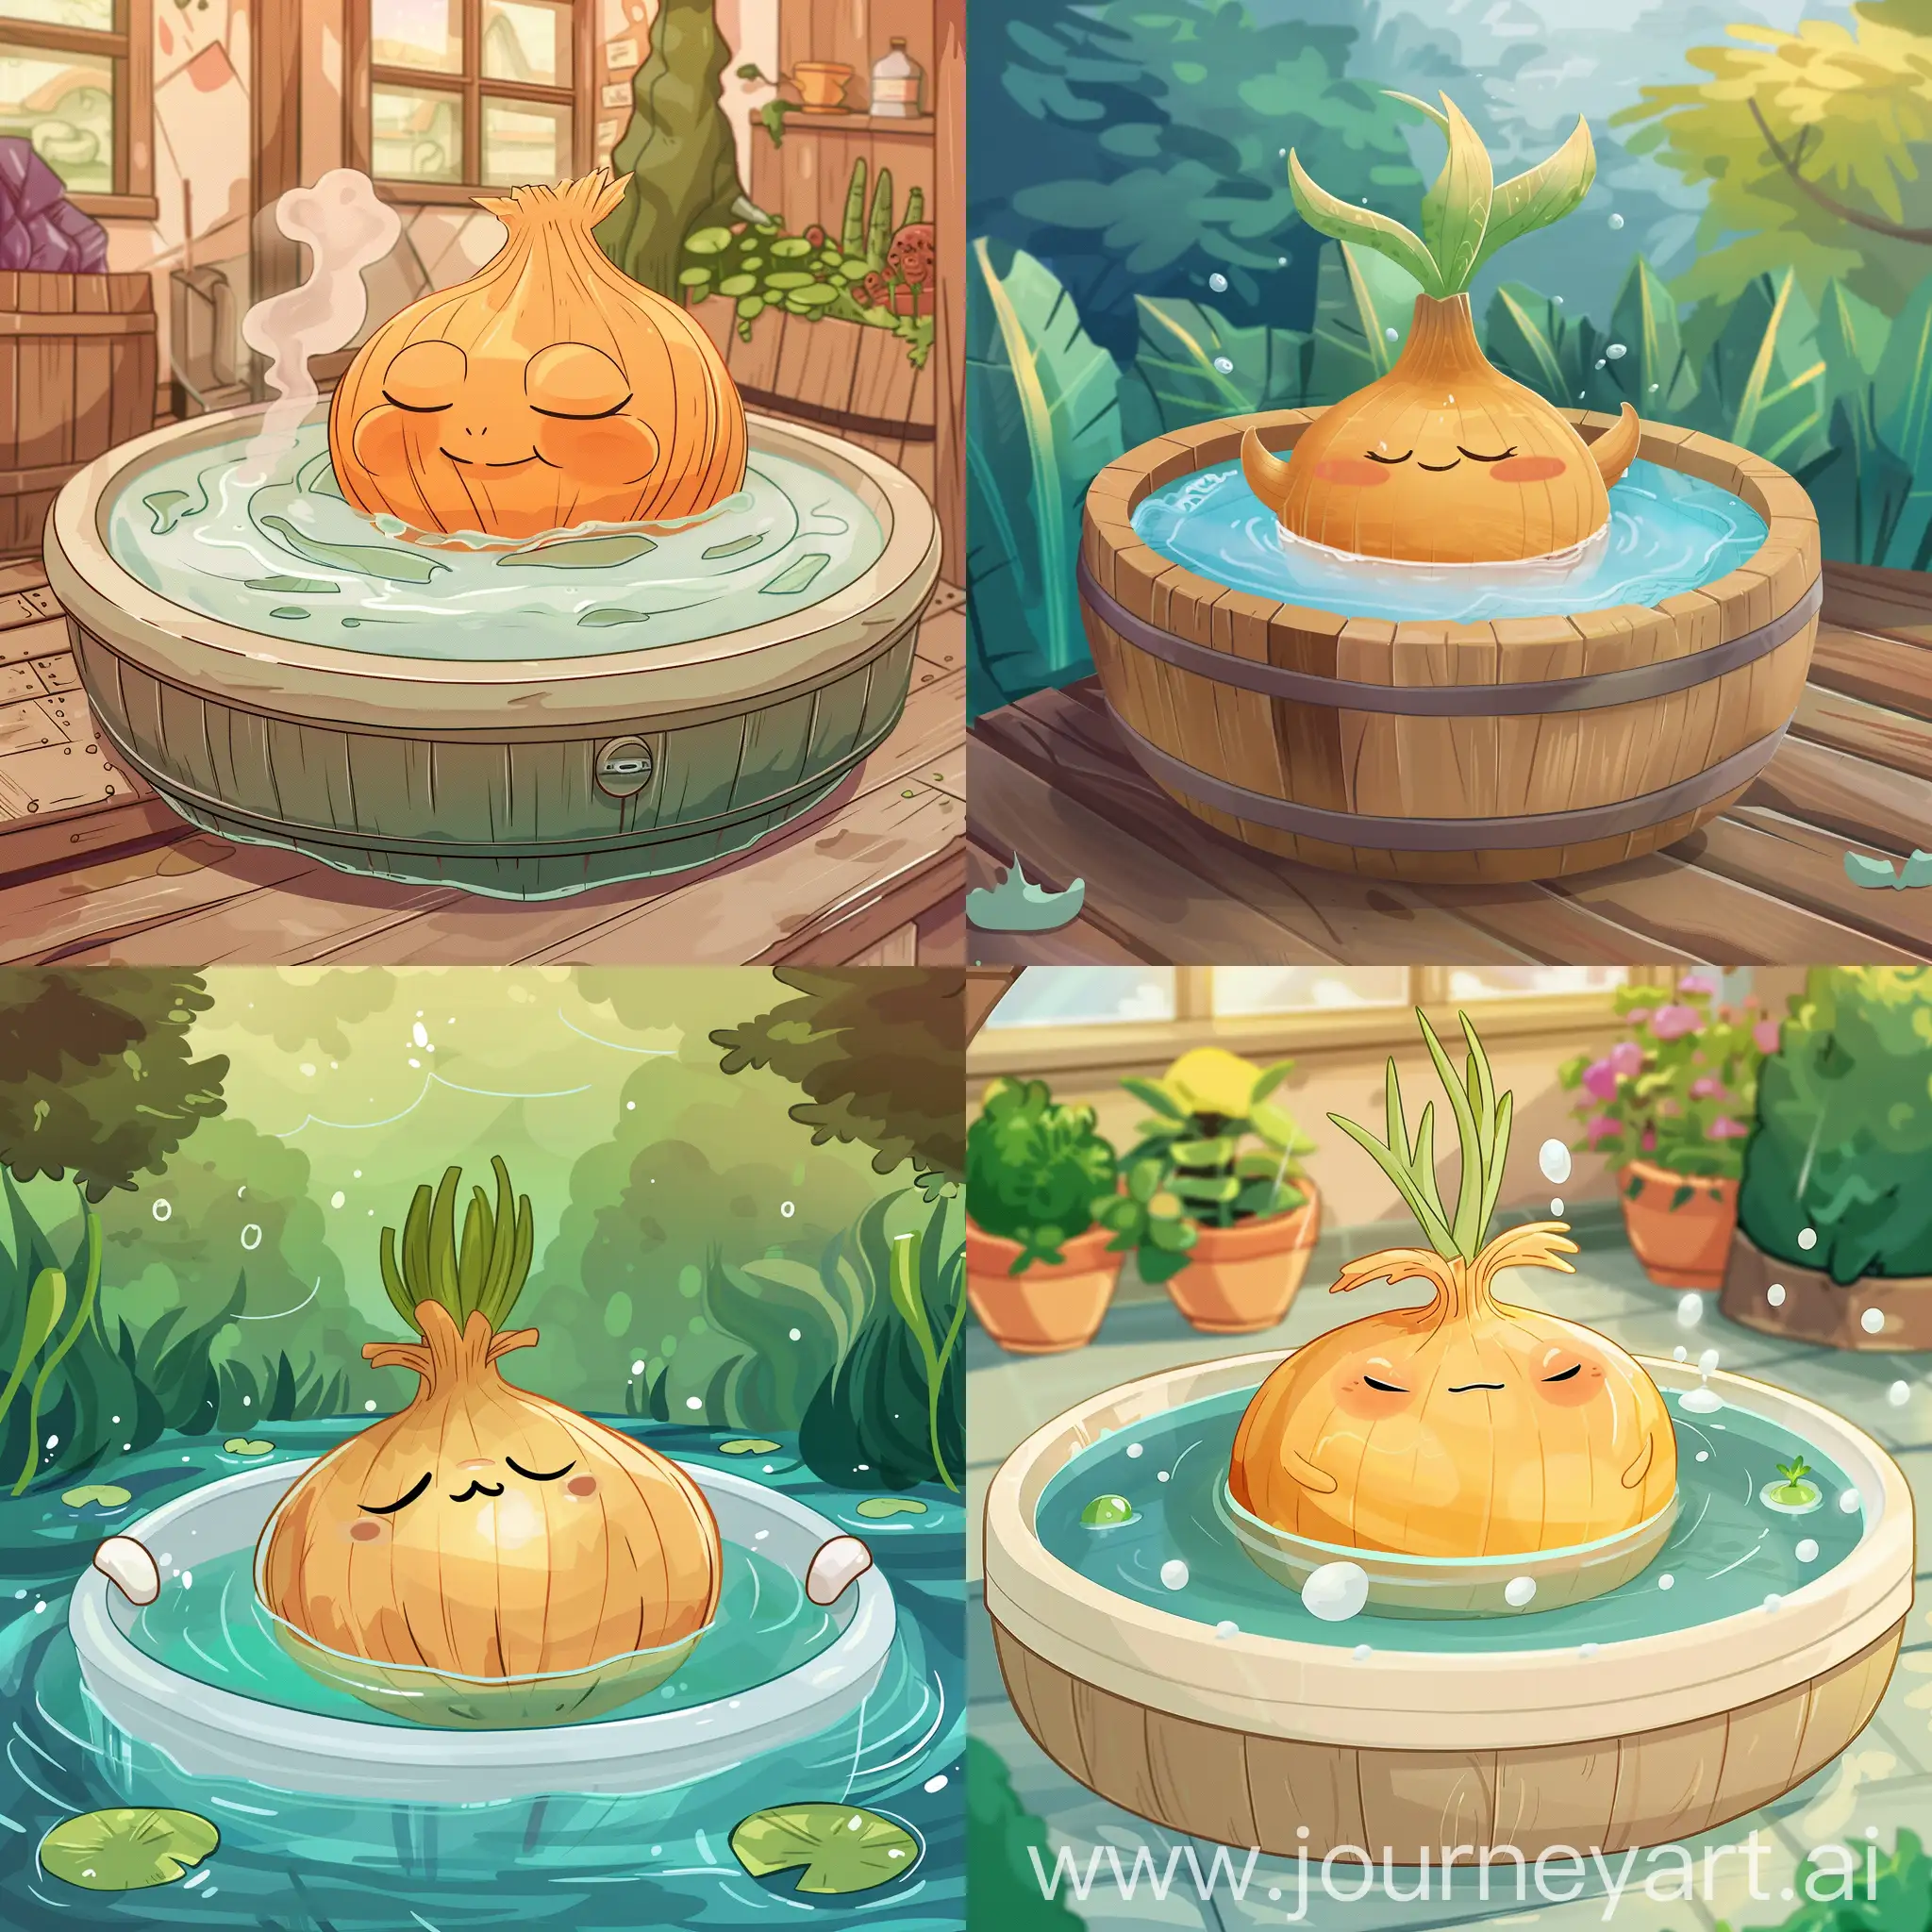 a cartoon image of a relaxed onion in a hot tub, in the style of fantastical environments, otherworldly creatures, luminosity of water, colorful mindscapes, detailed character design